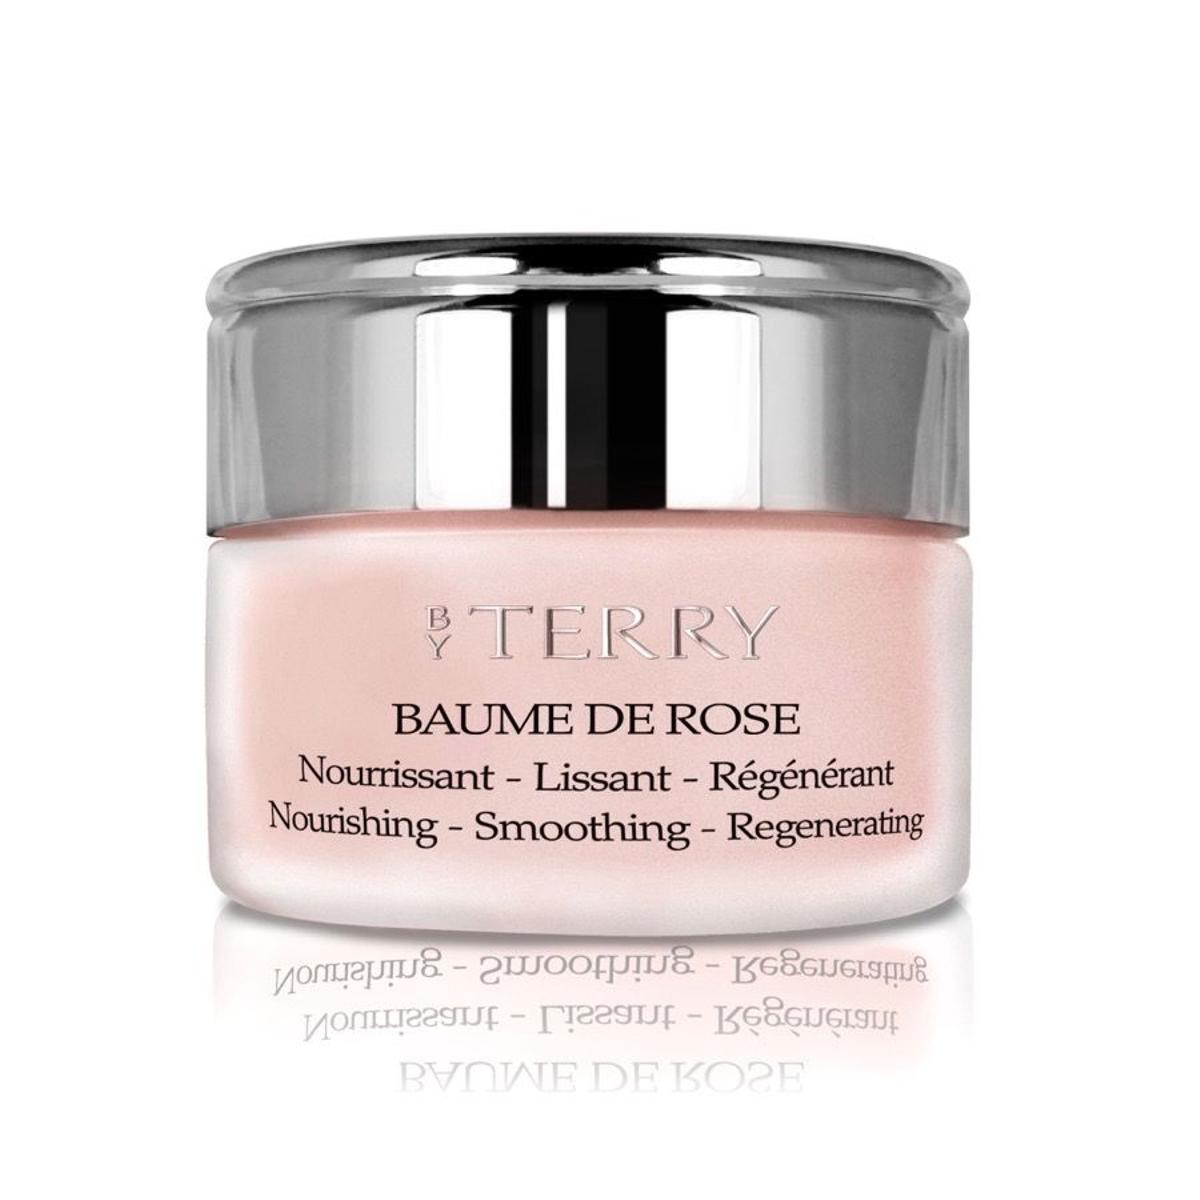 'Baume de rose' By Terry